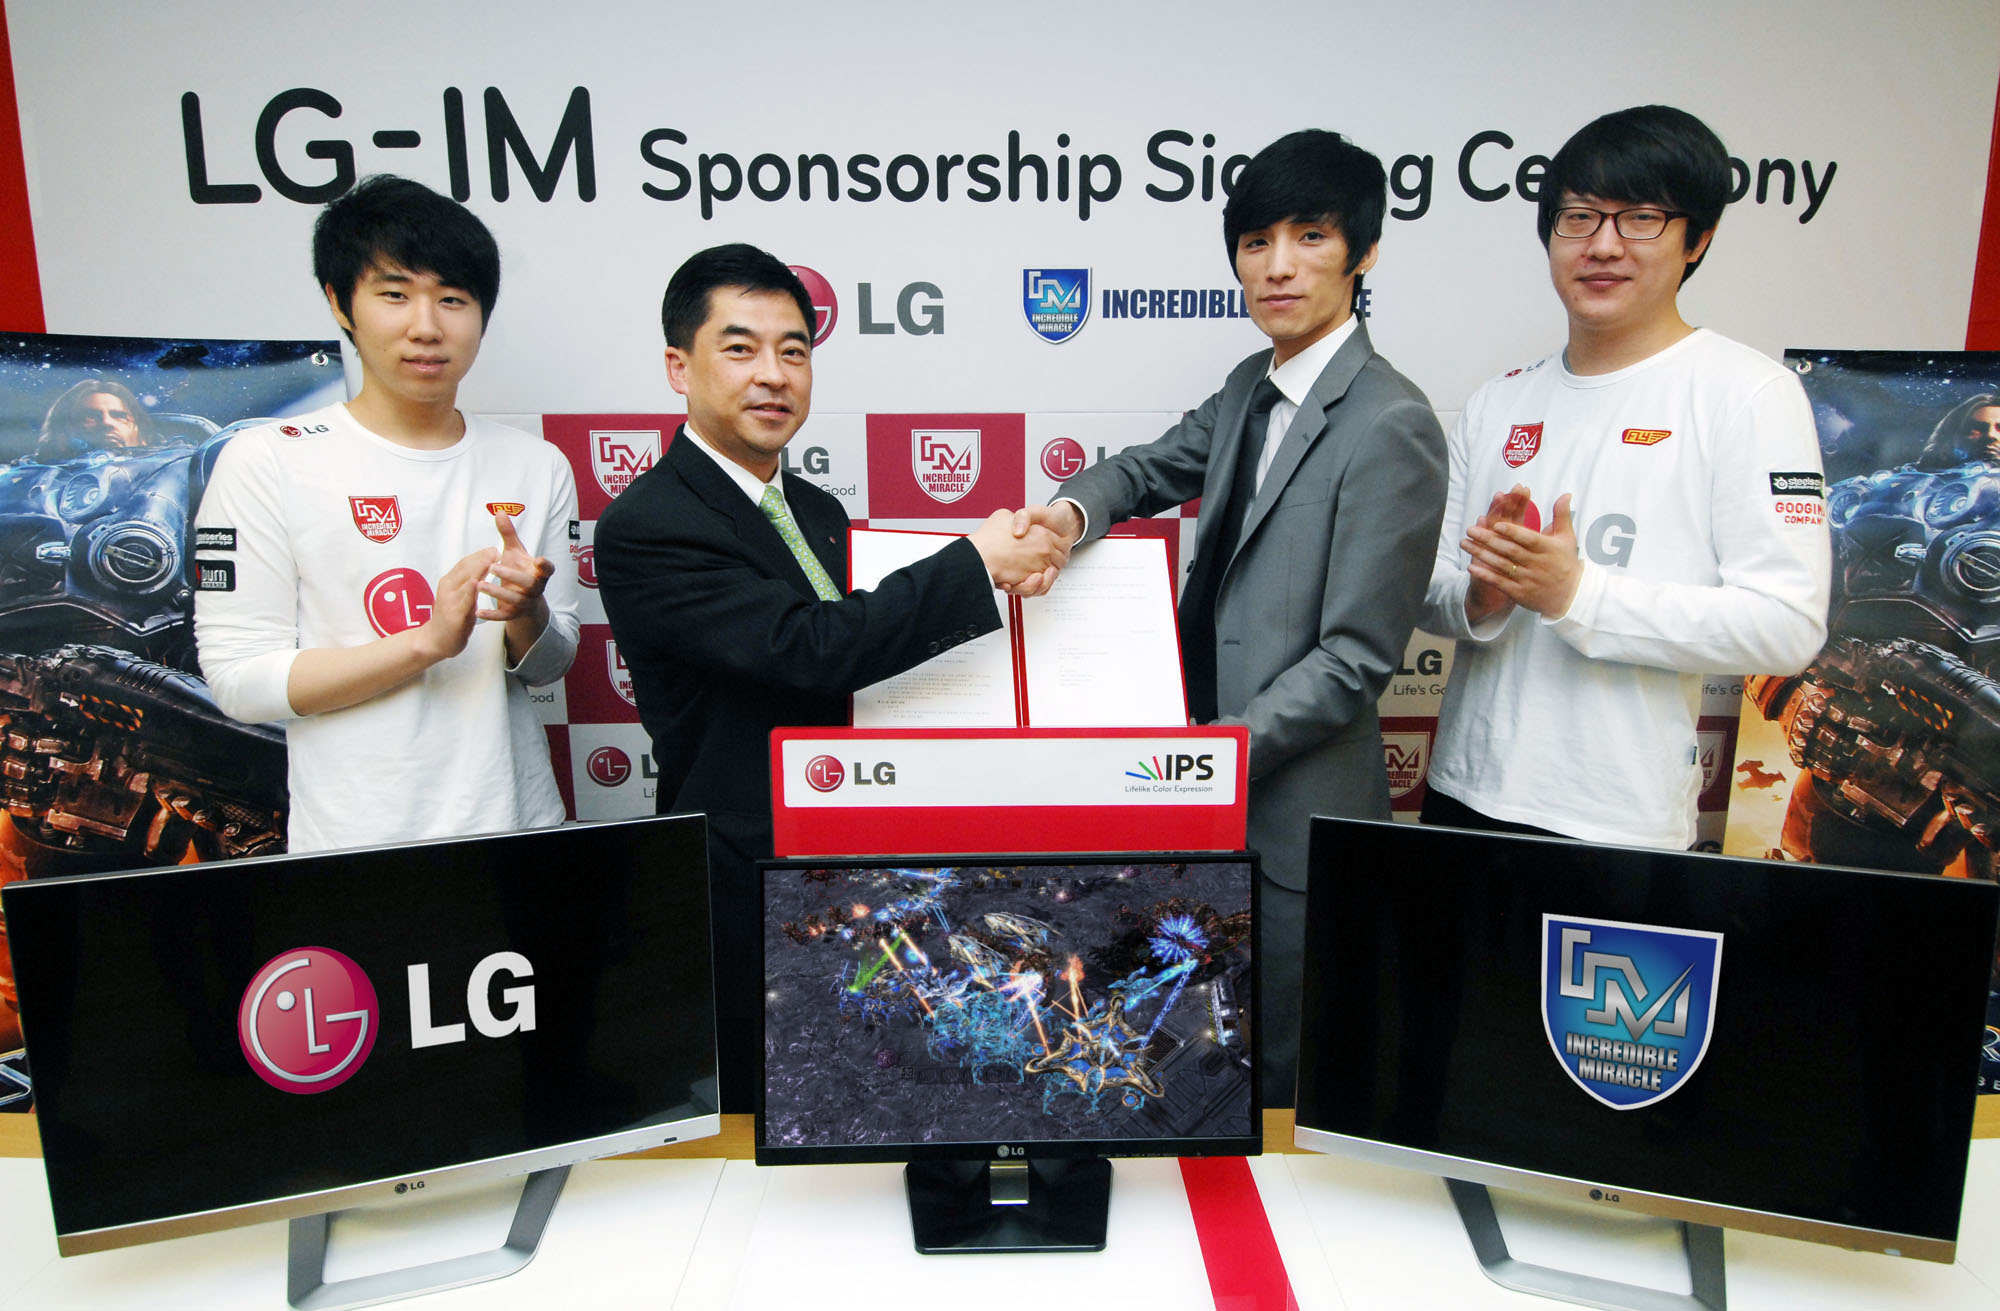 J.J. Lee, executive vice president and head of the IT Business Unit of LG Home Entertainment, with members of the Incredible Miracle Team of the Global StarCraft II League